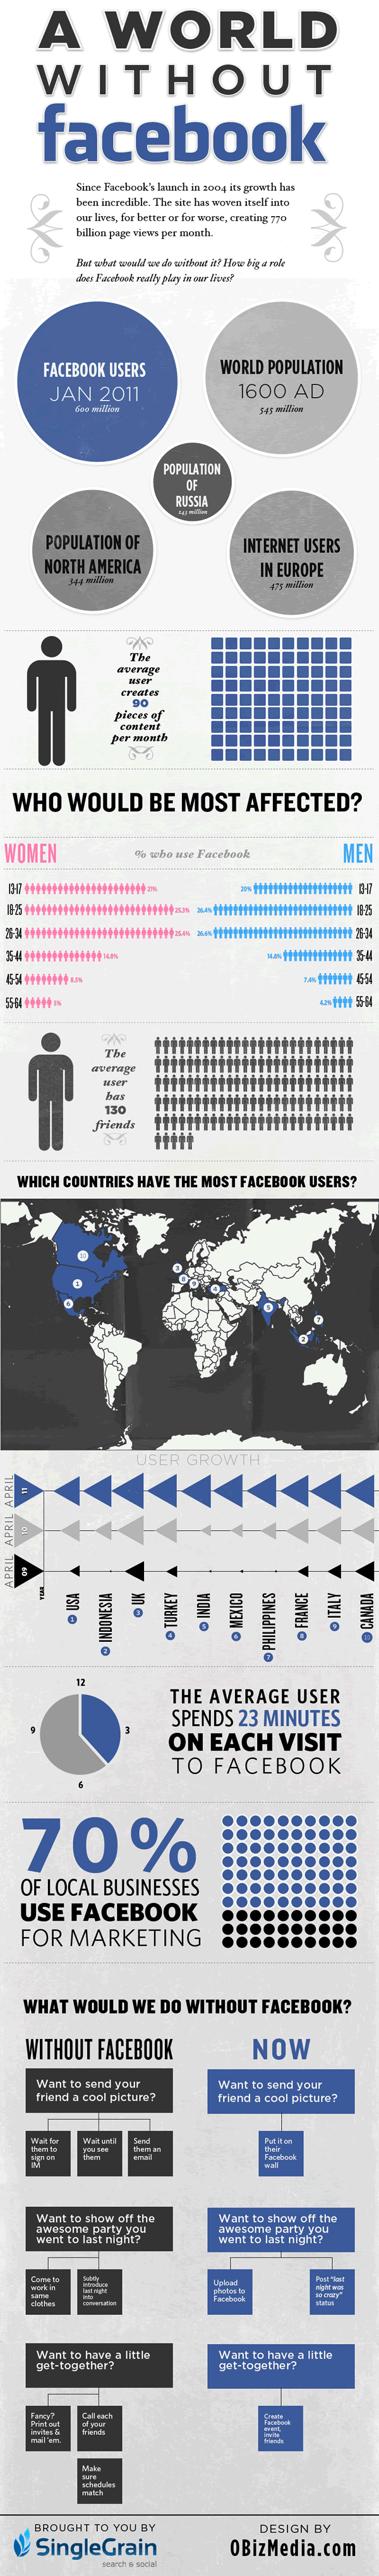 World without facebook